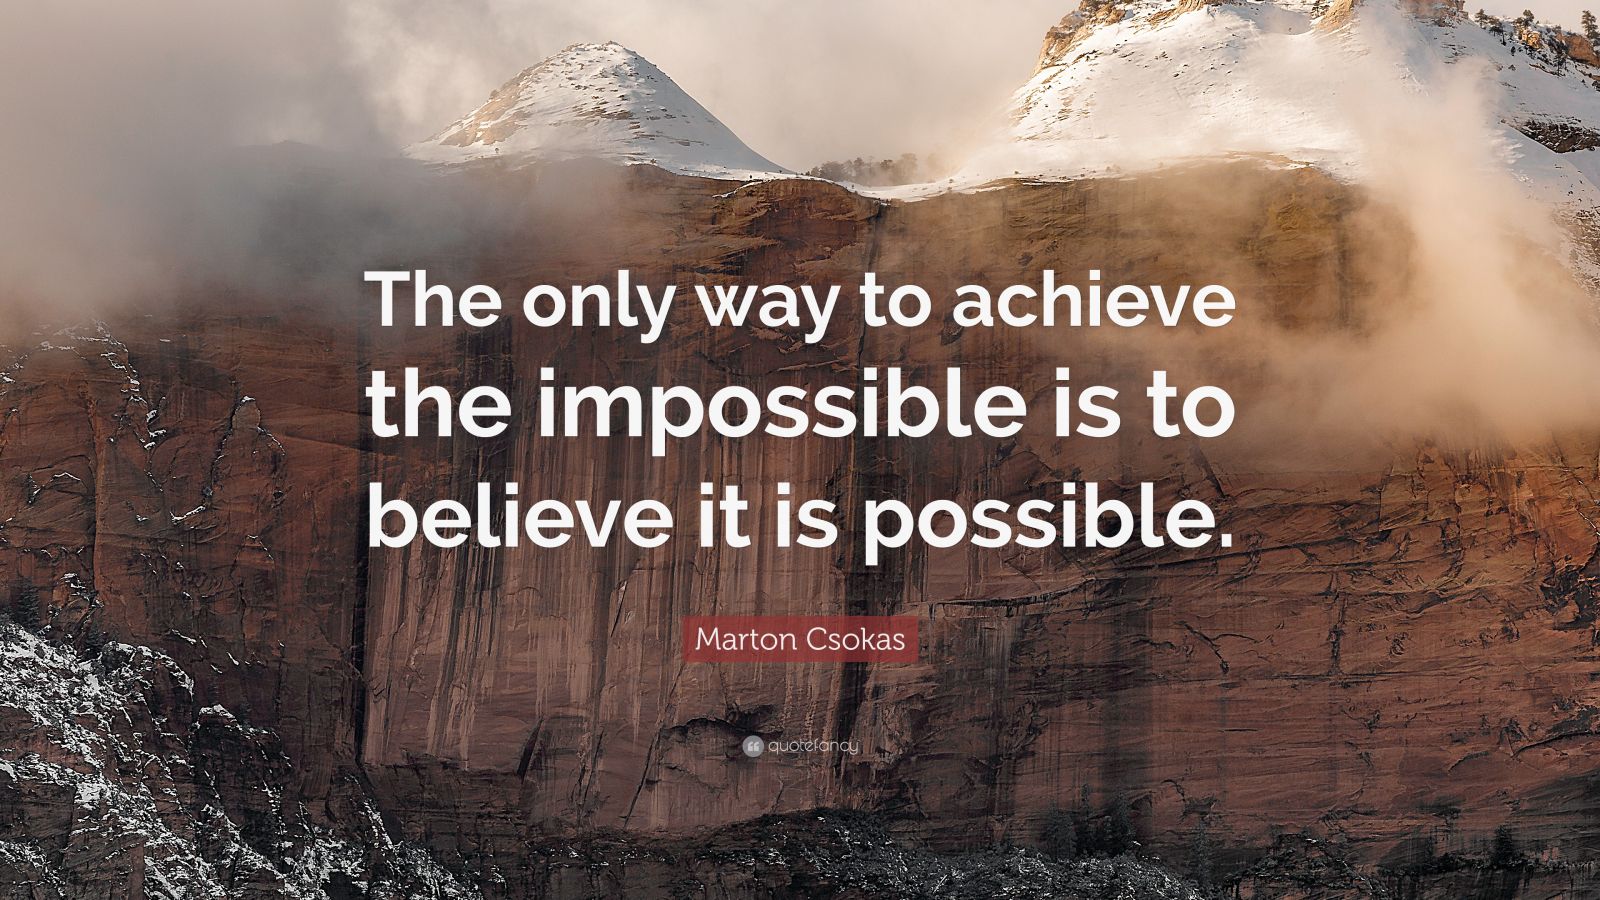 Marton Csokas Quote: “The only way to achieve the impossible is to ...